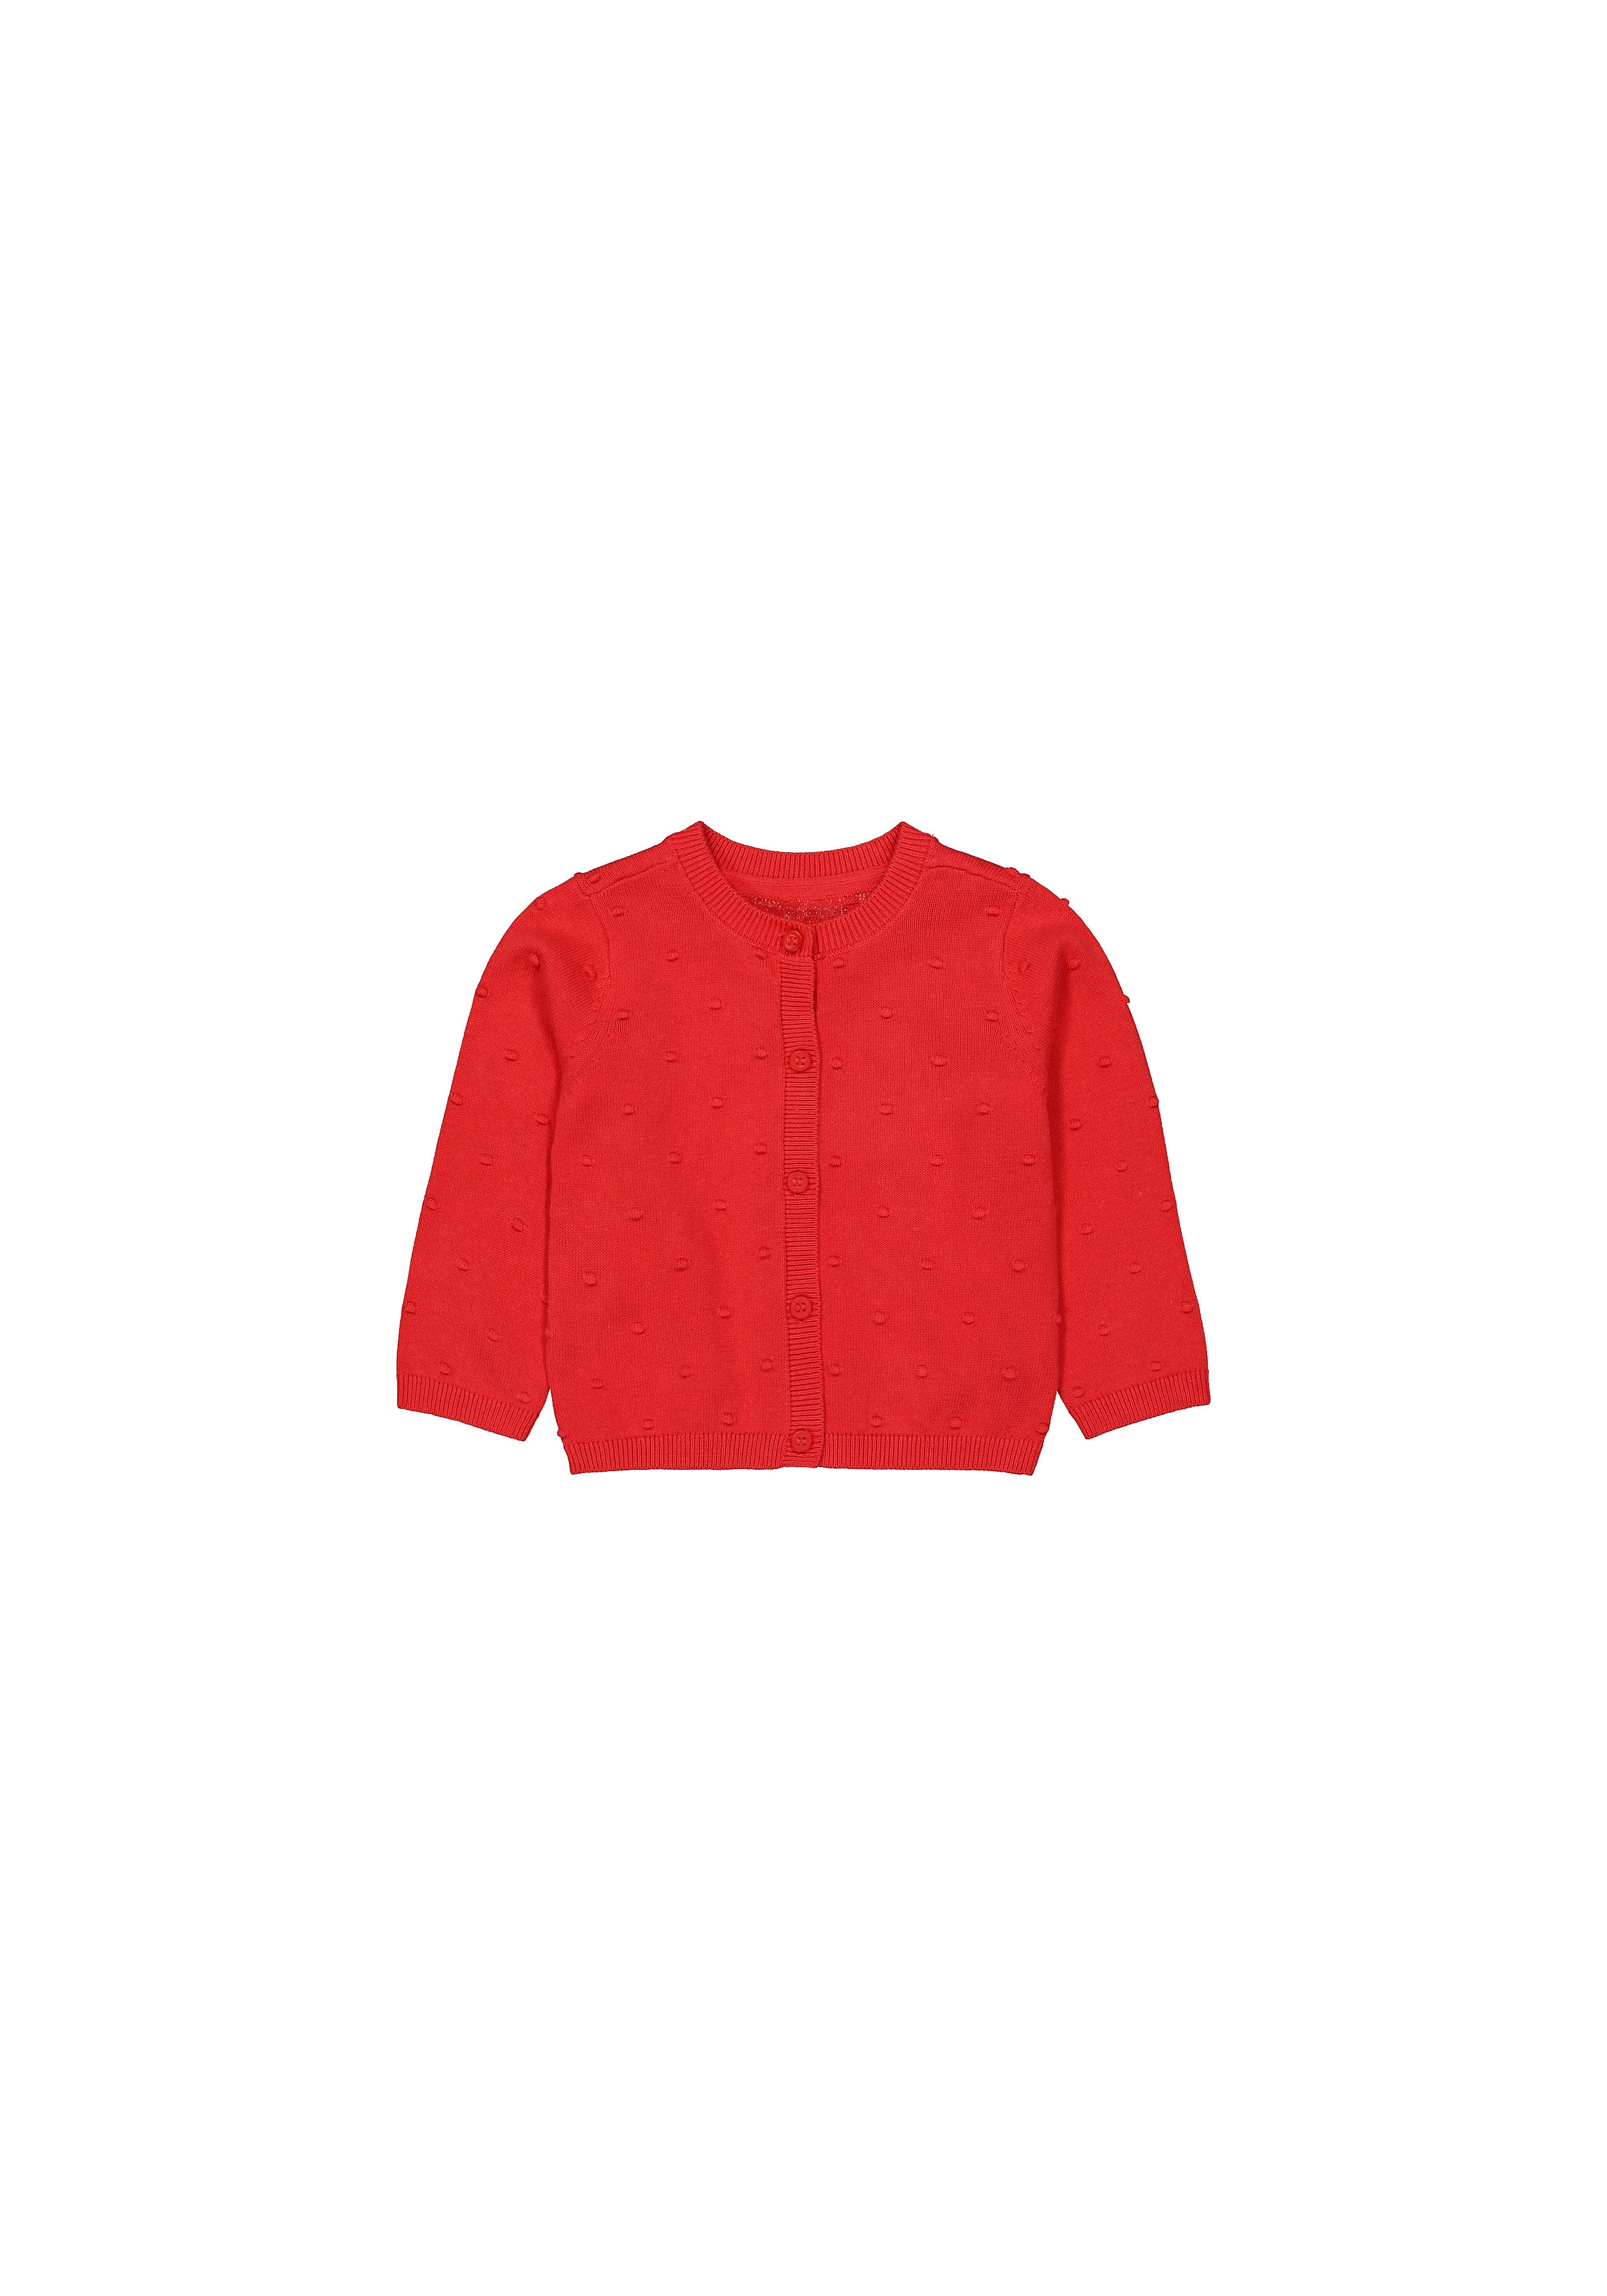 Mothercare | Girls Full Sleeves Sweaters  - Hot Pink